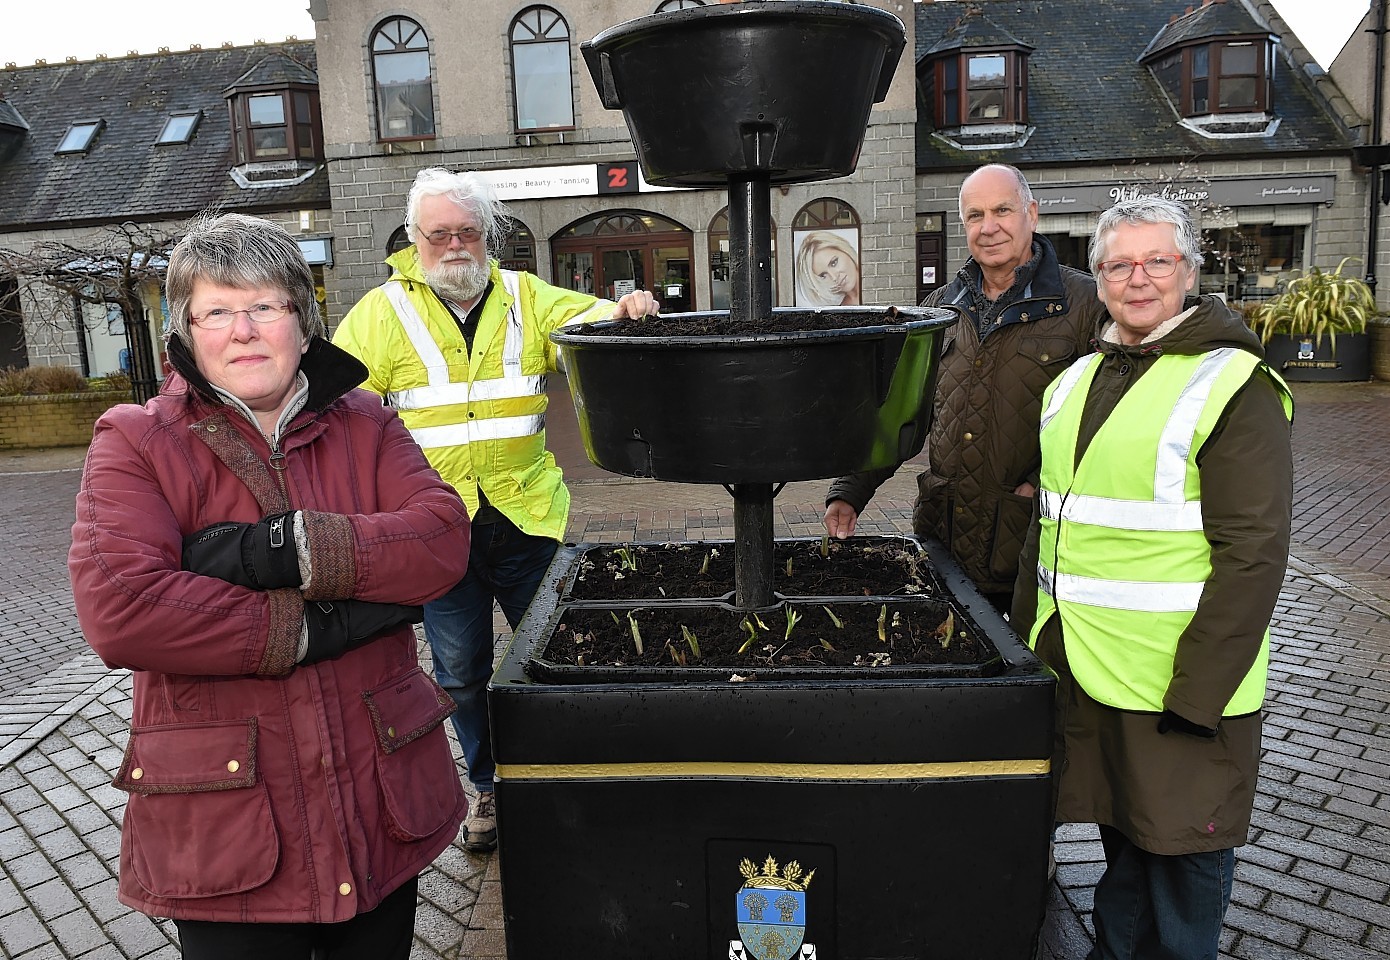 Ellon Civic Pride's planter in Neil Ross Square has been vandalised for the second week in a row. (from left) Frances Watson, Forbes Hamilton, Bill Gibb and Aileen Taylor.
Picture by COLIN RENNIE